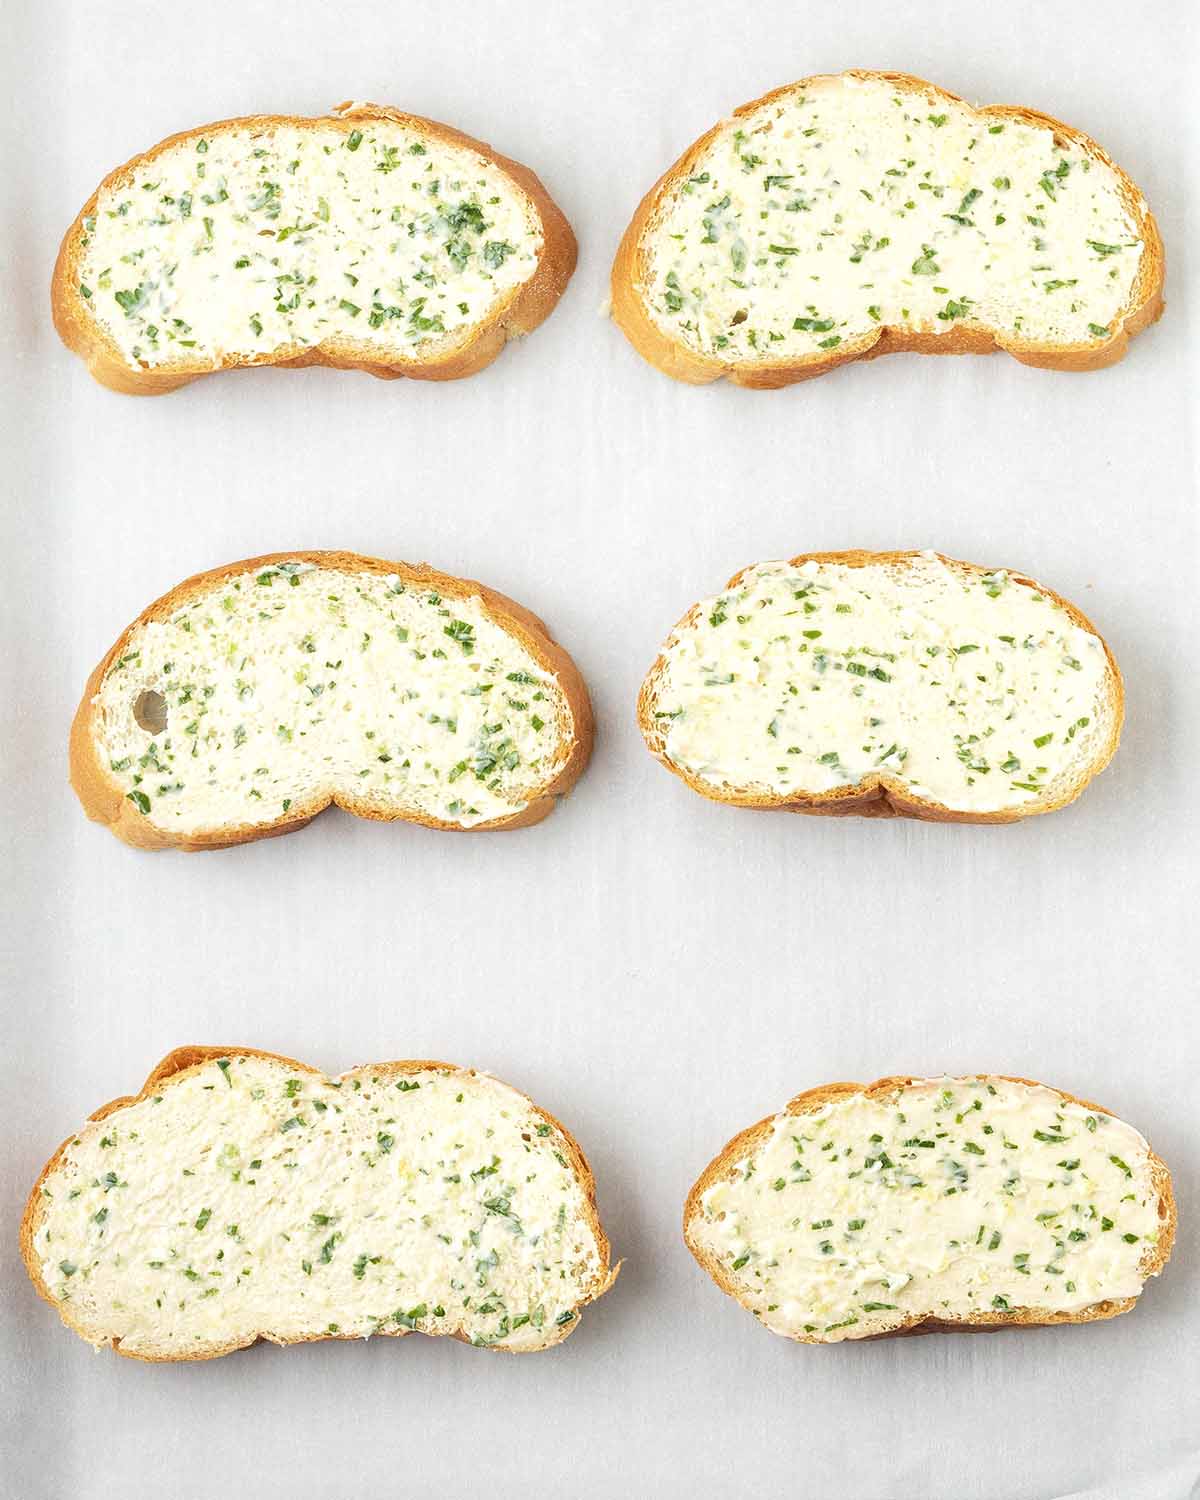 An overhead image showing six slices of bread with garlic spread on a parchment lined baking pan before it is toasted.